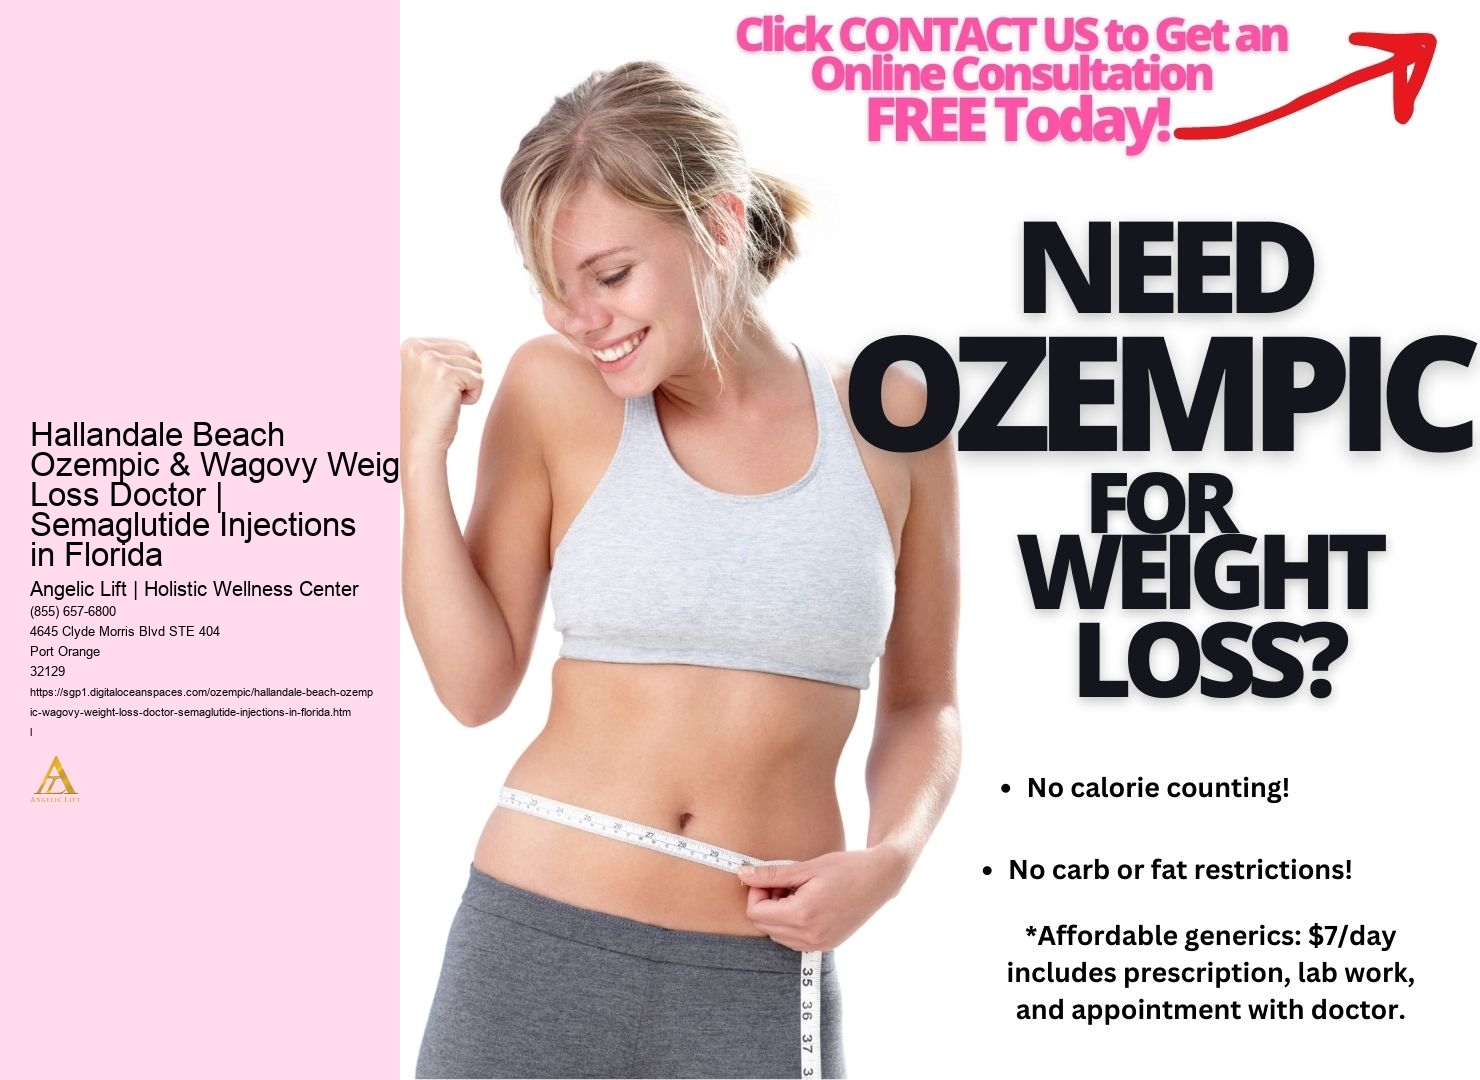 Hallandale Beach Ozempic & Wagovy Weight Loss Doctor | Semaglutide Injections in Florida